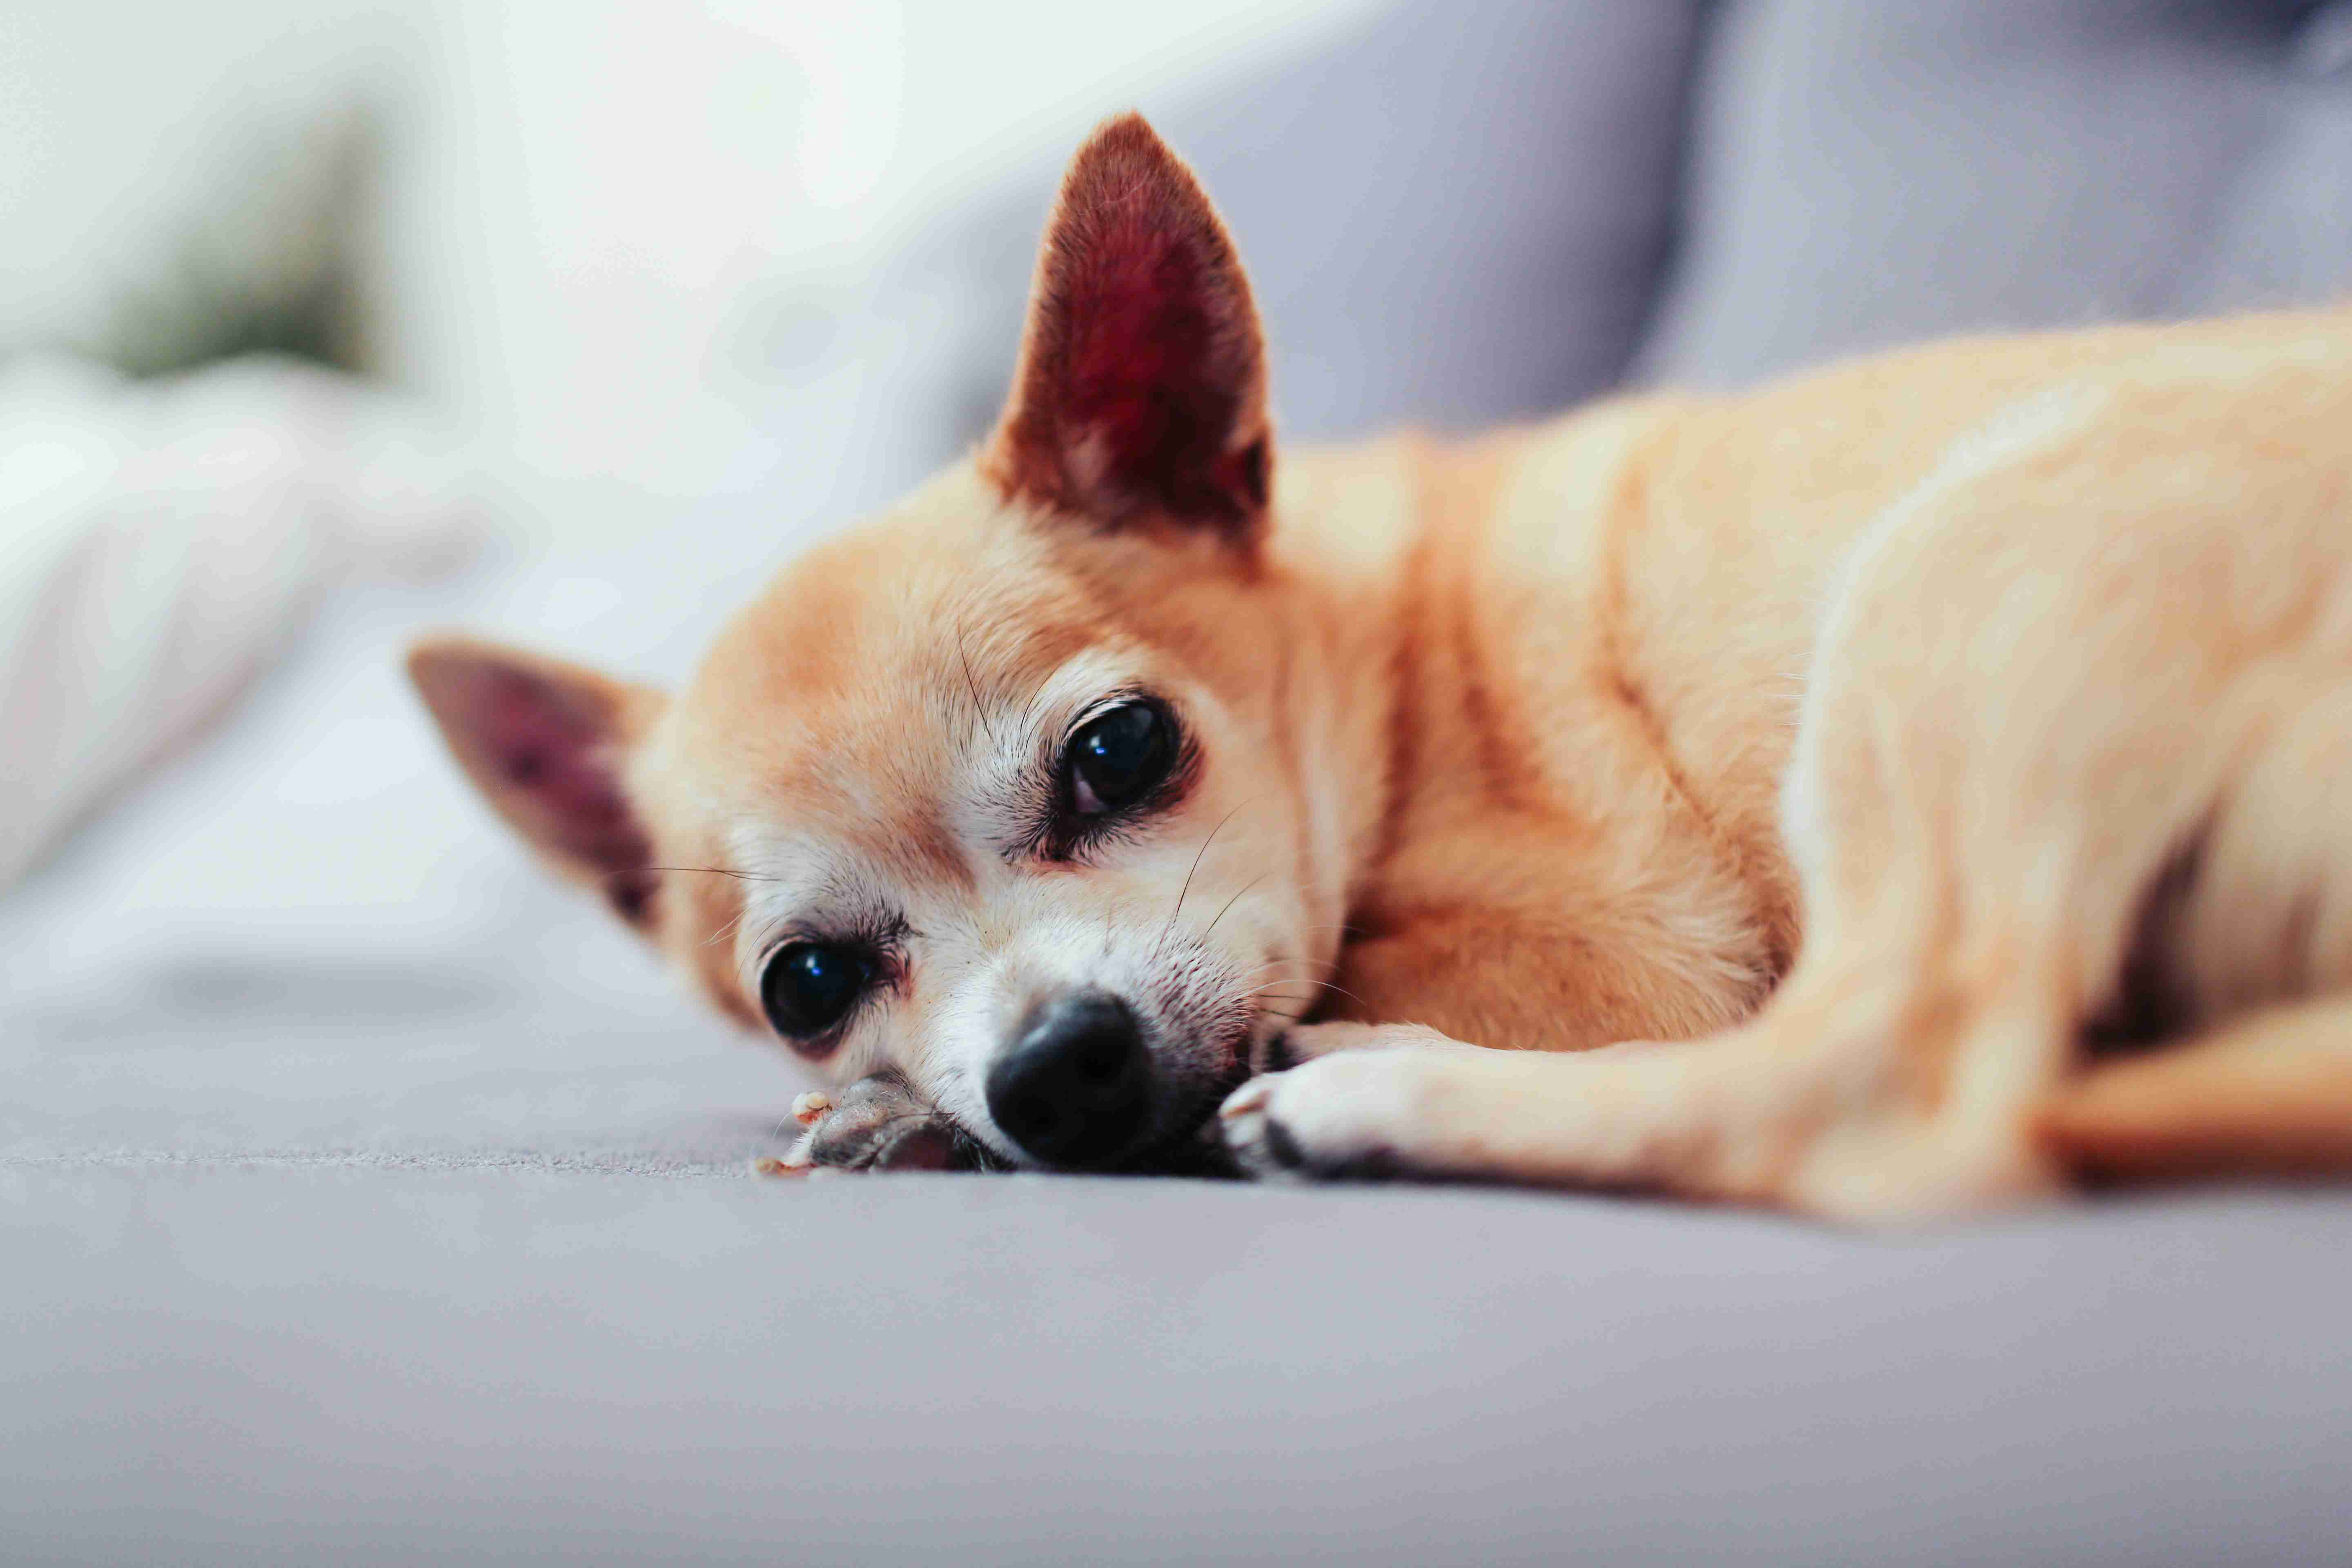 Can Chihuahuas become aggressive towards other Chihuahuas, and if so, how can this be prevented?